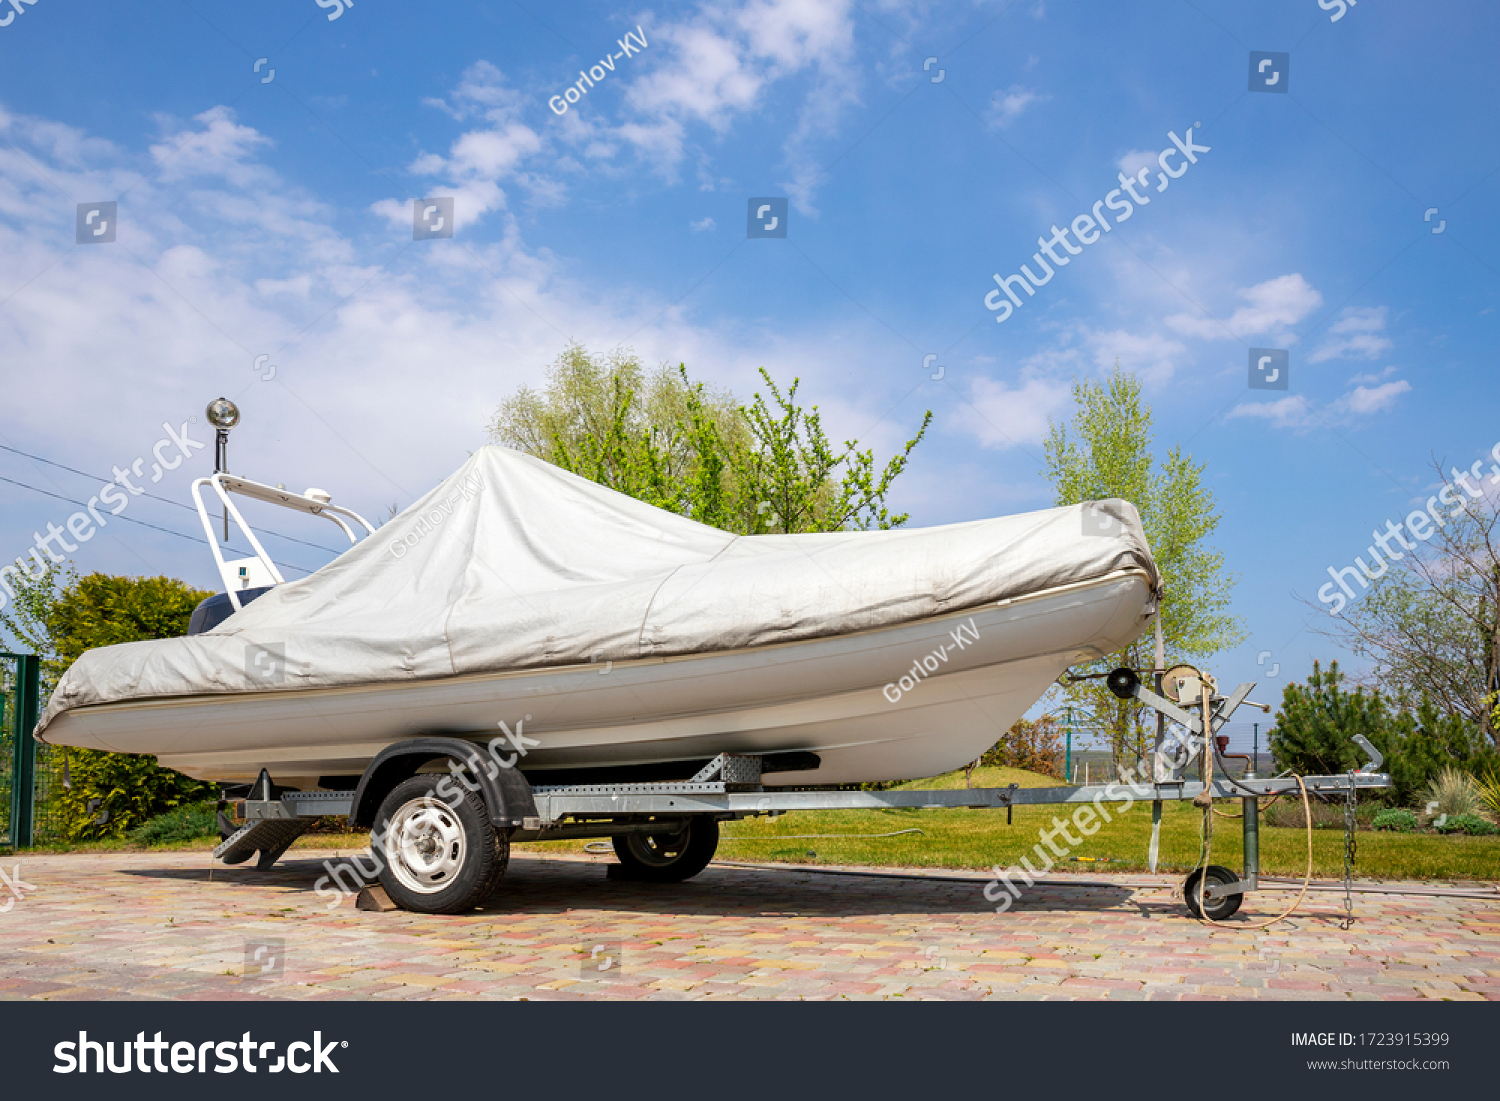 Big modern inflatable motorboat ship covered with grey or white protection tarp standing on steel semi trailer at home backyard on bright sunny day with blue sky on background. Boat vessel storage #1723915399